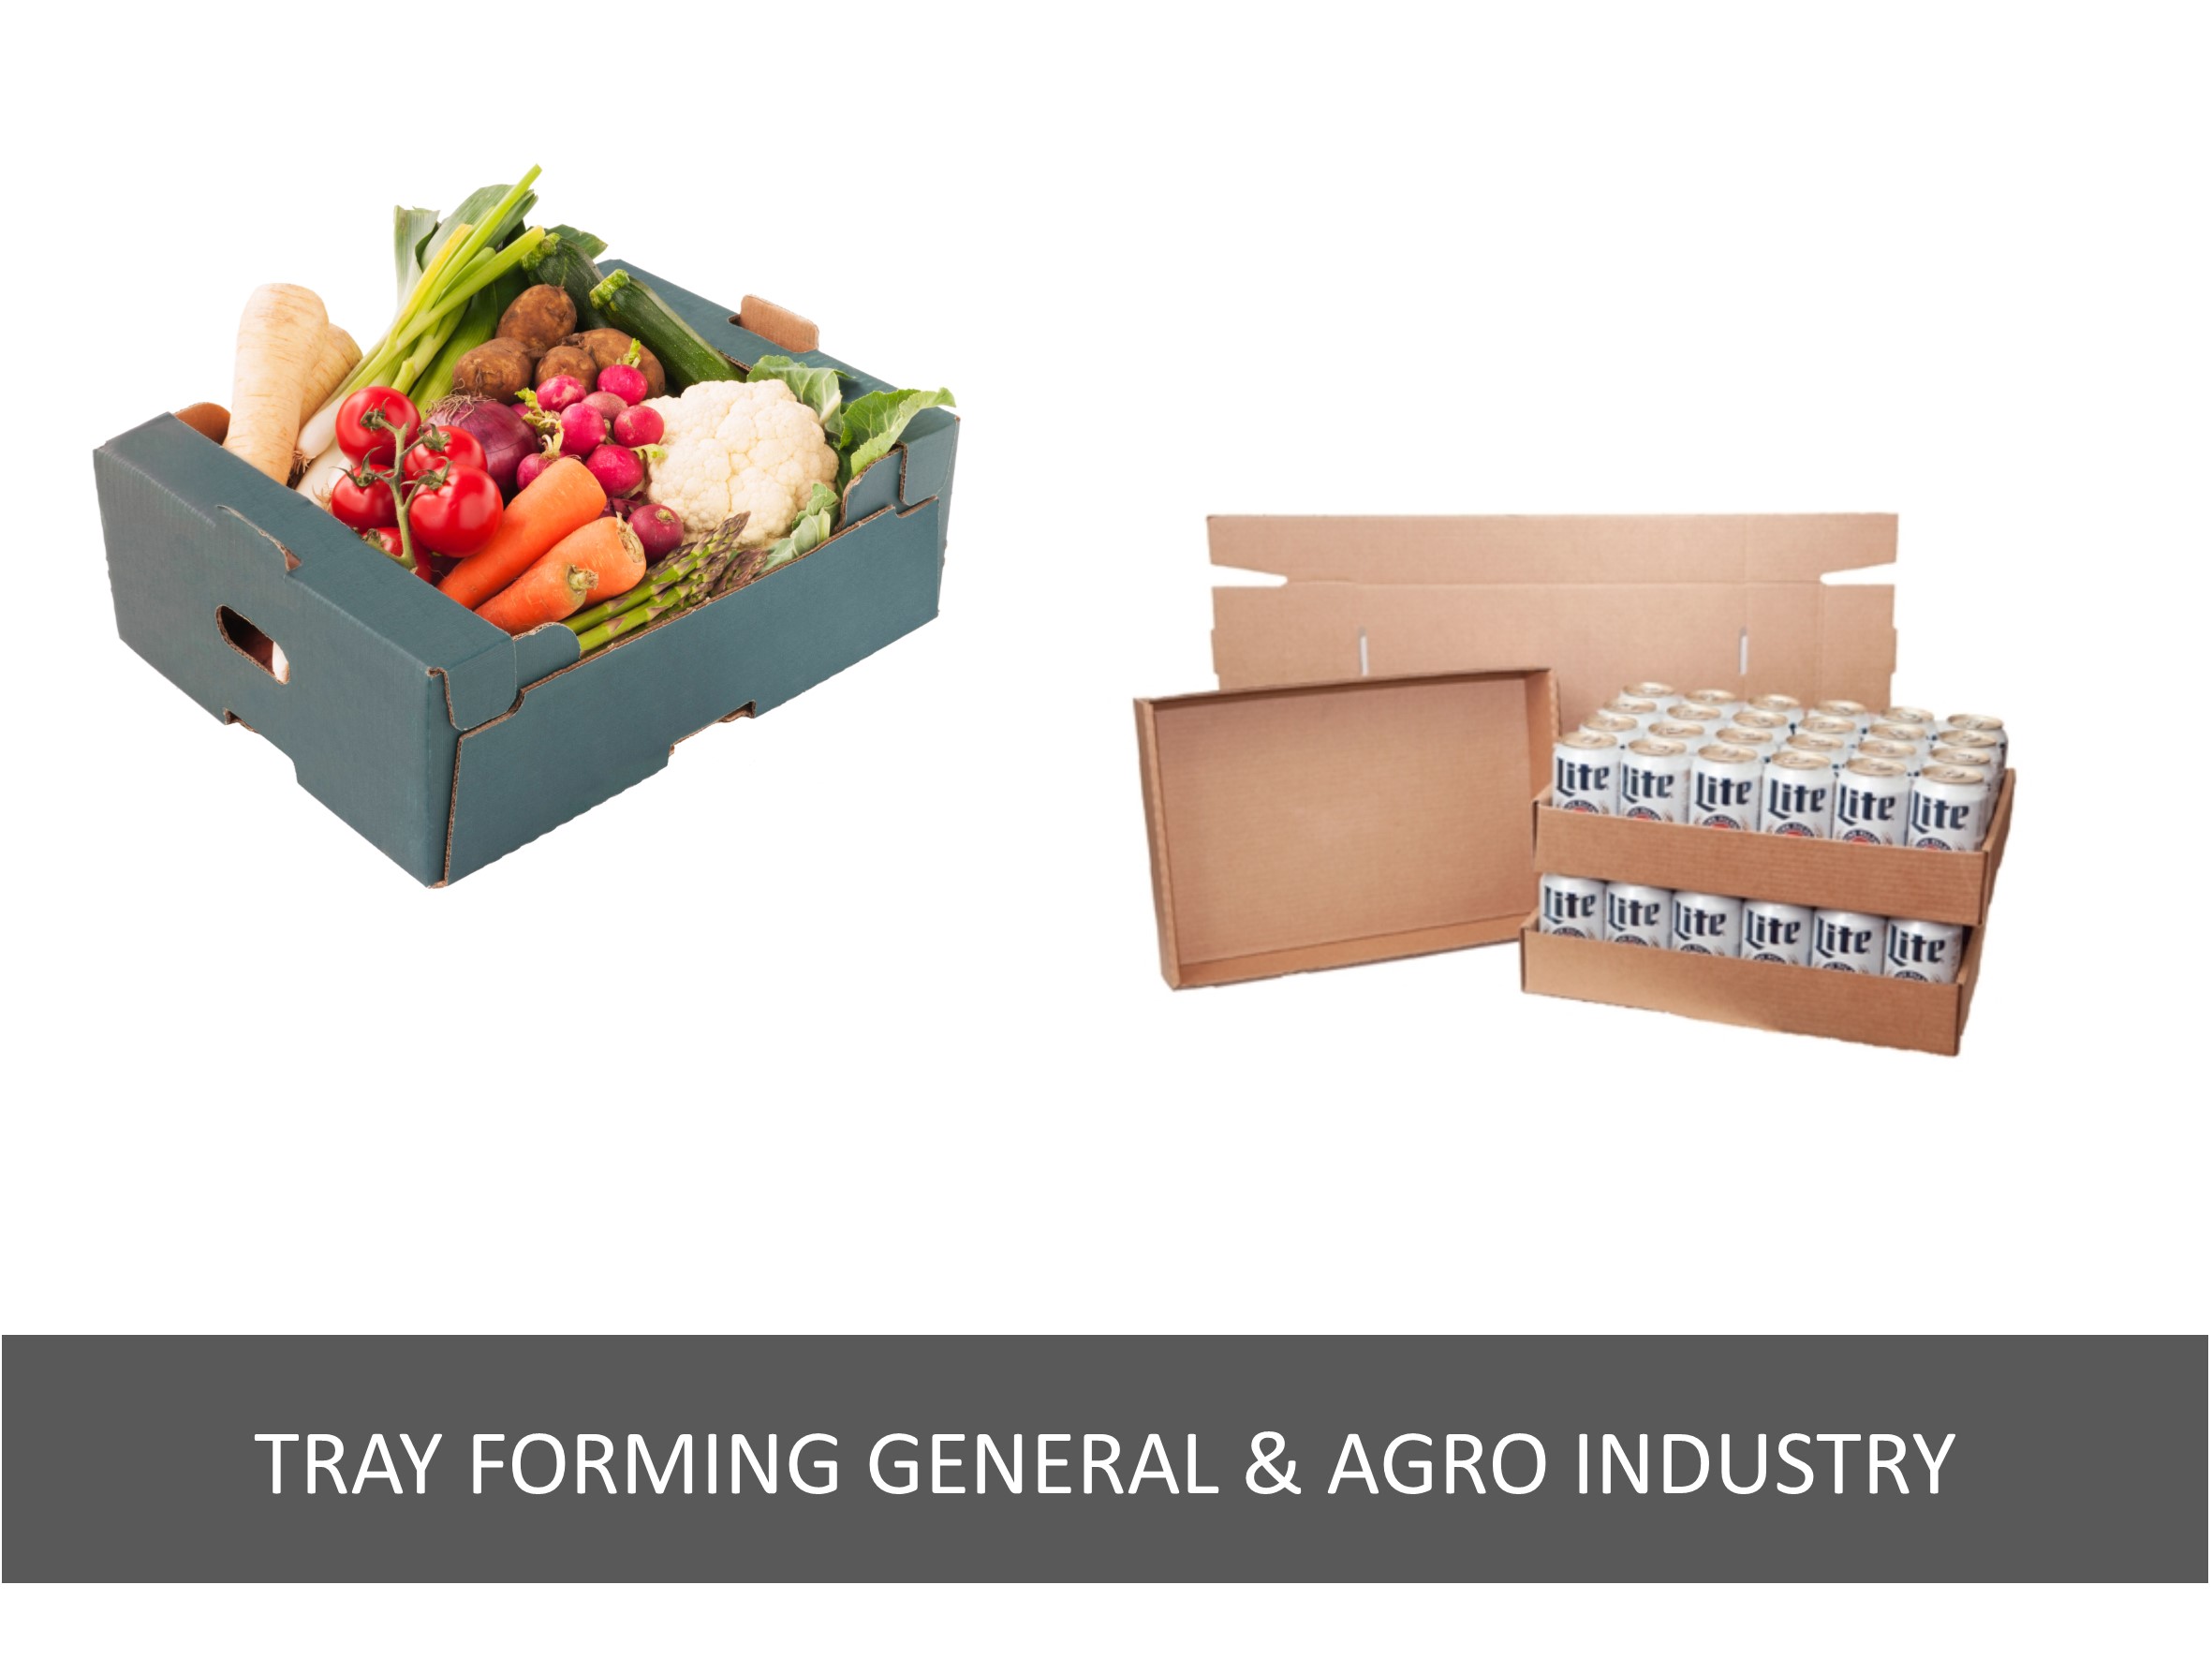 Tray forming, general & agro industry